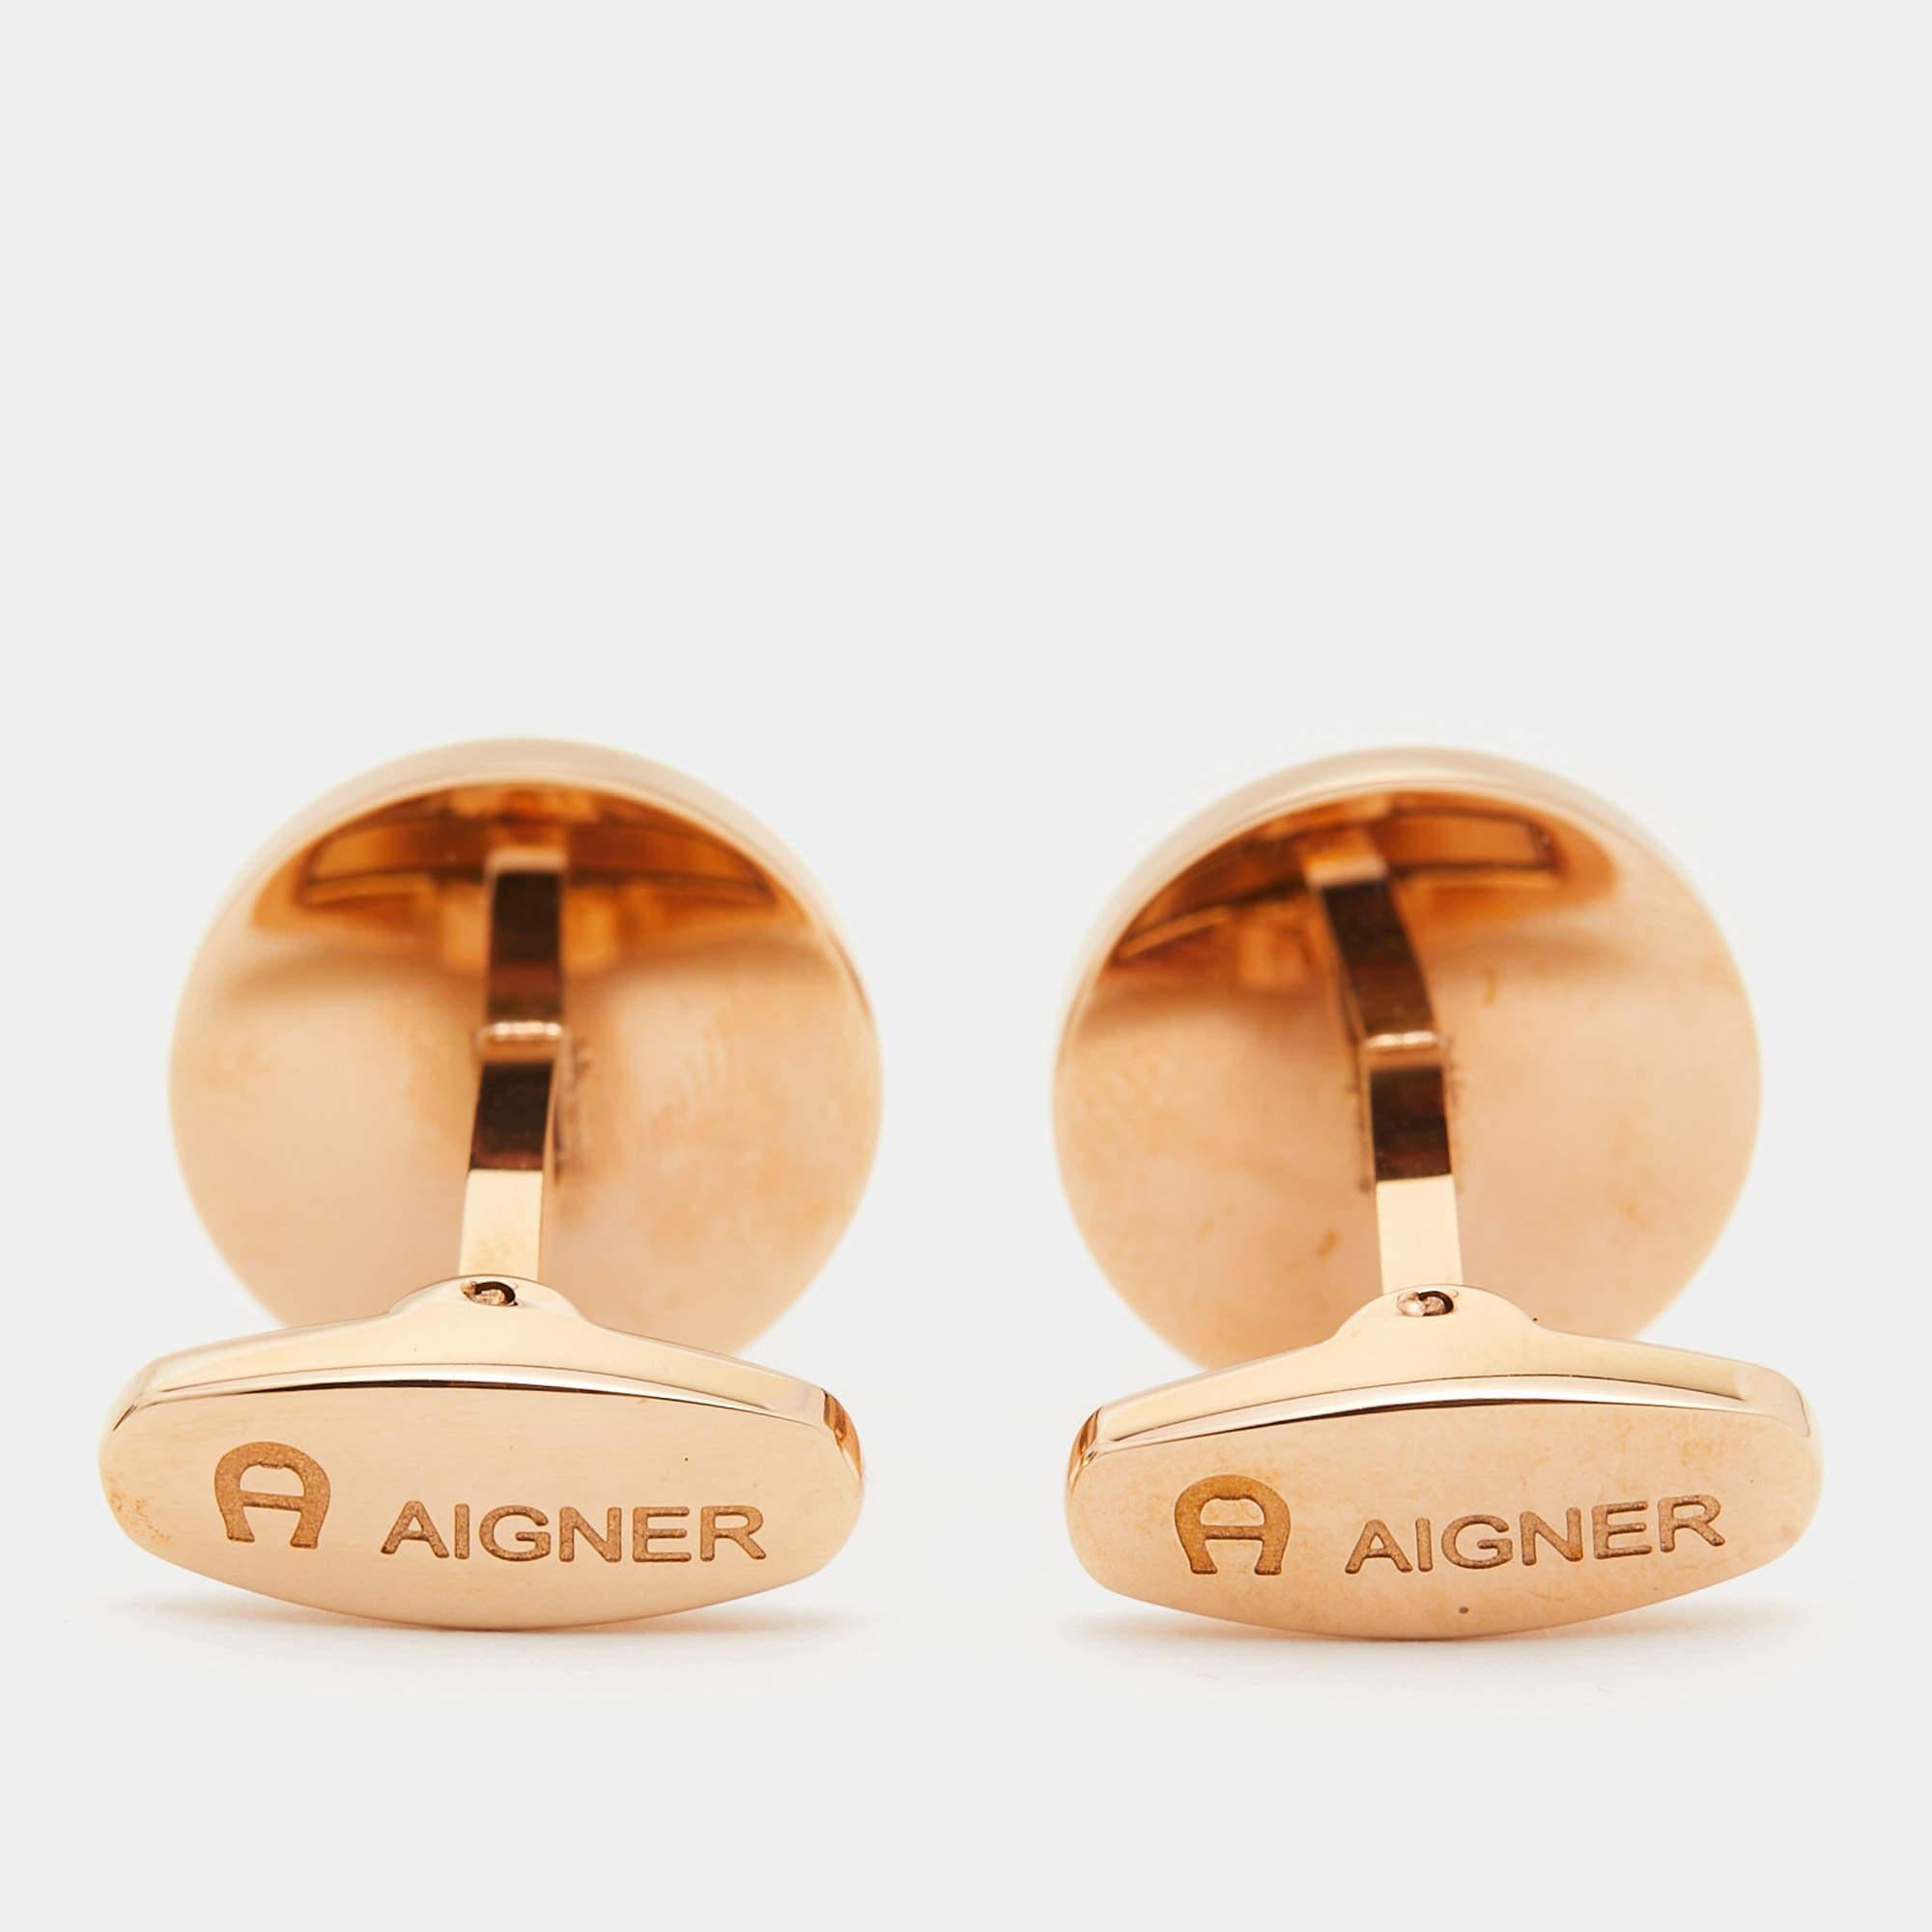 Aigner cufflinks exude sophistication with their refined design. Crafted in gold-tone metal, they feature enamel detailing, adding a touch of elegance. The iconic Aigner logo is subtly incorporated, making these cufflinks a stylish accessory for